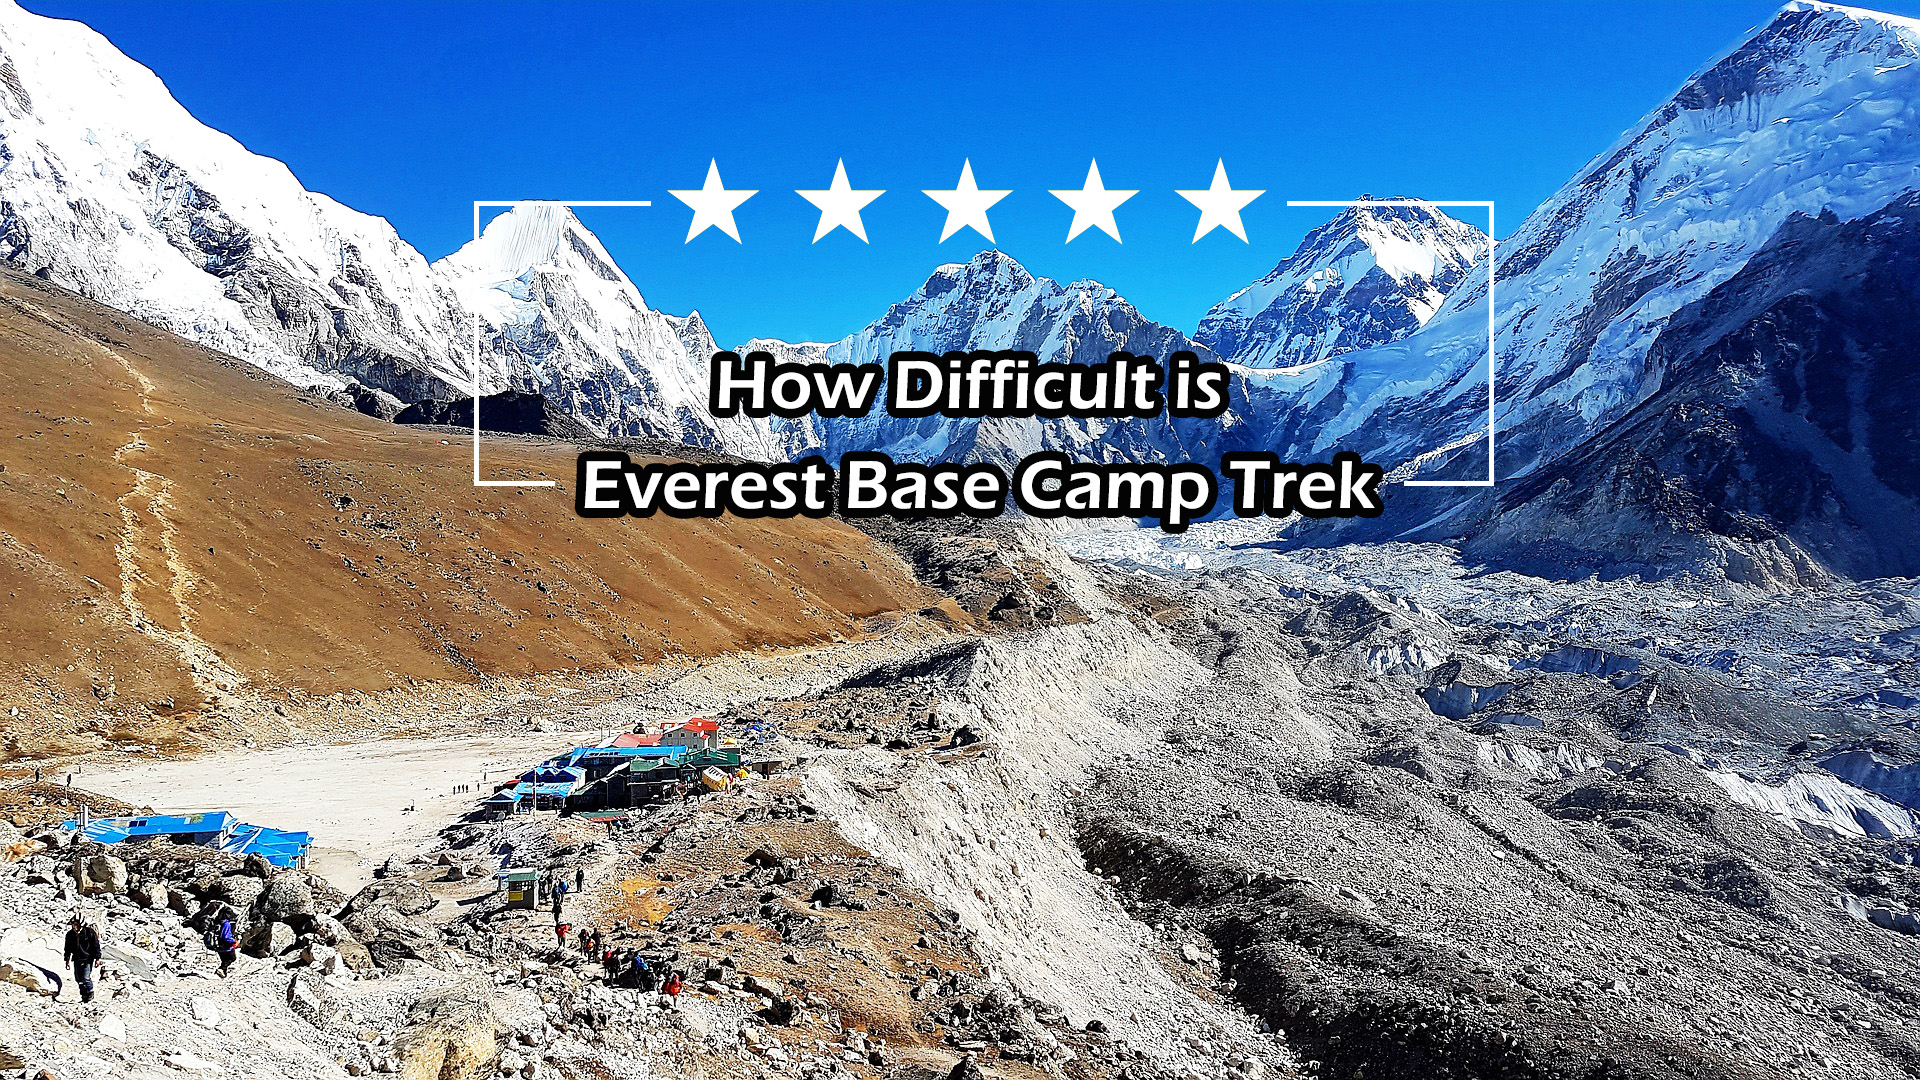 How difficult is Everest base camp trek